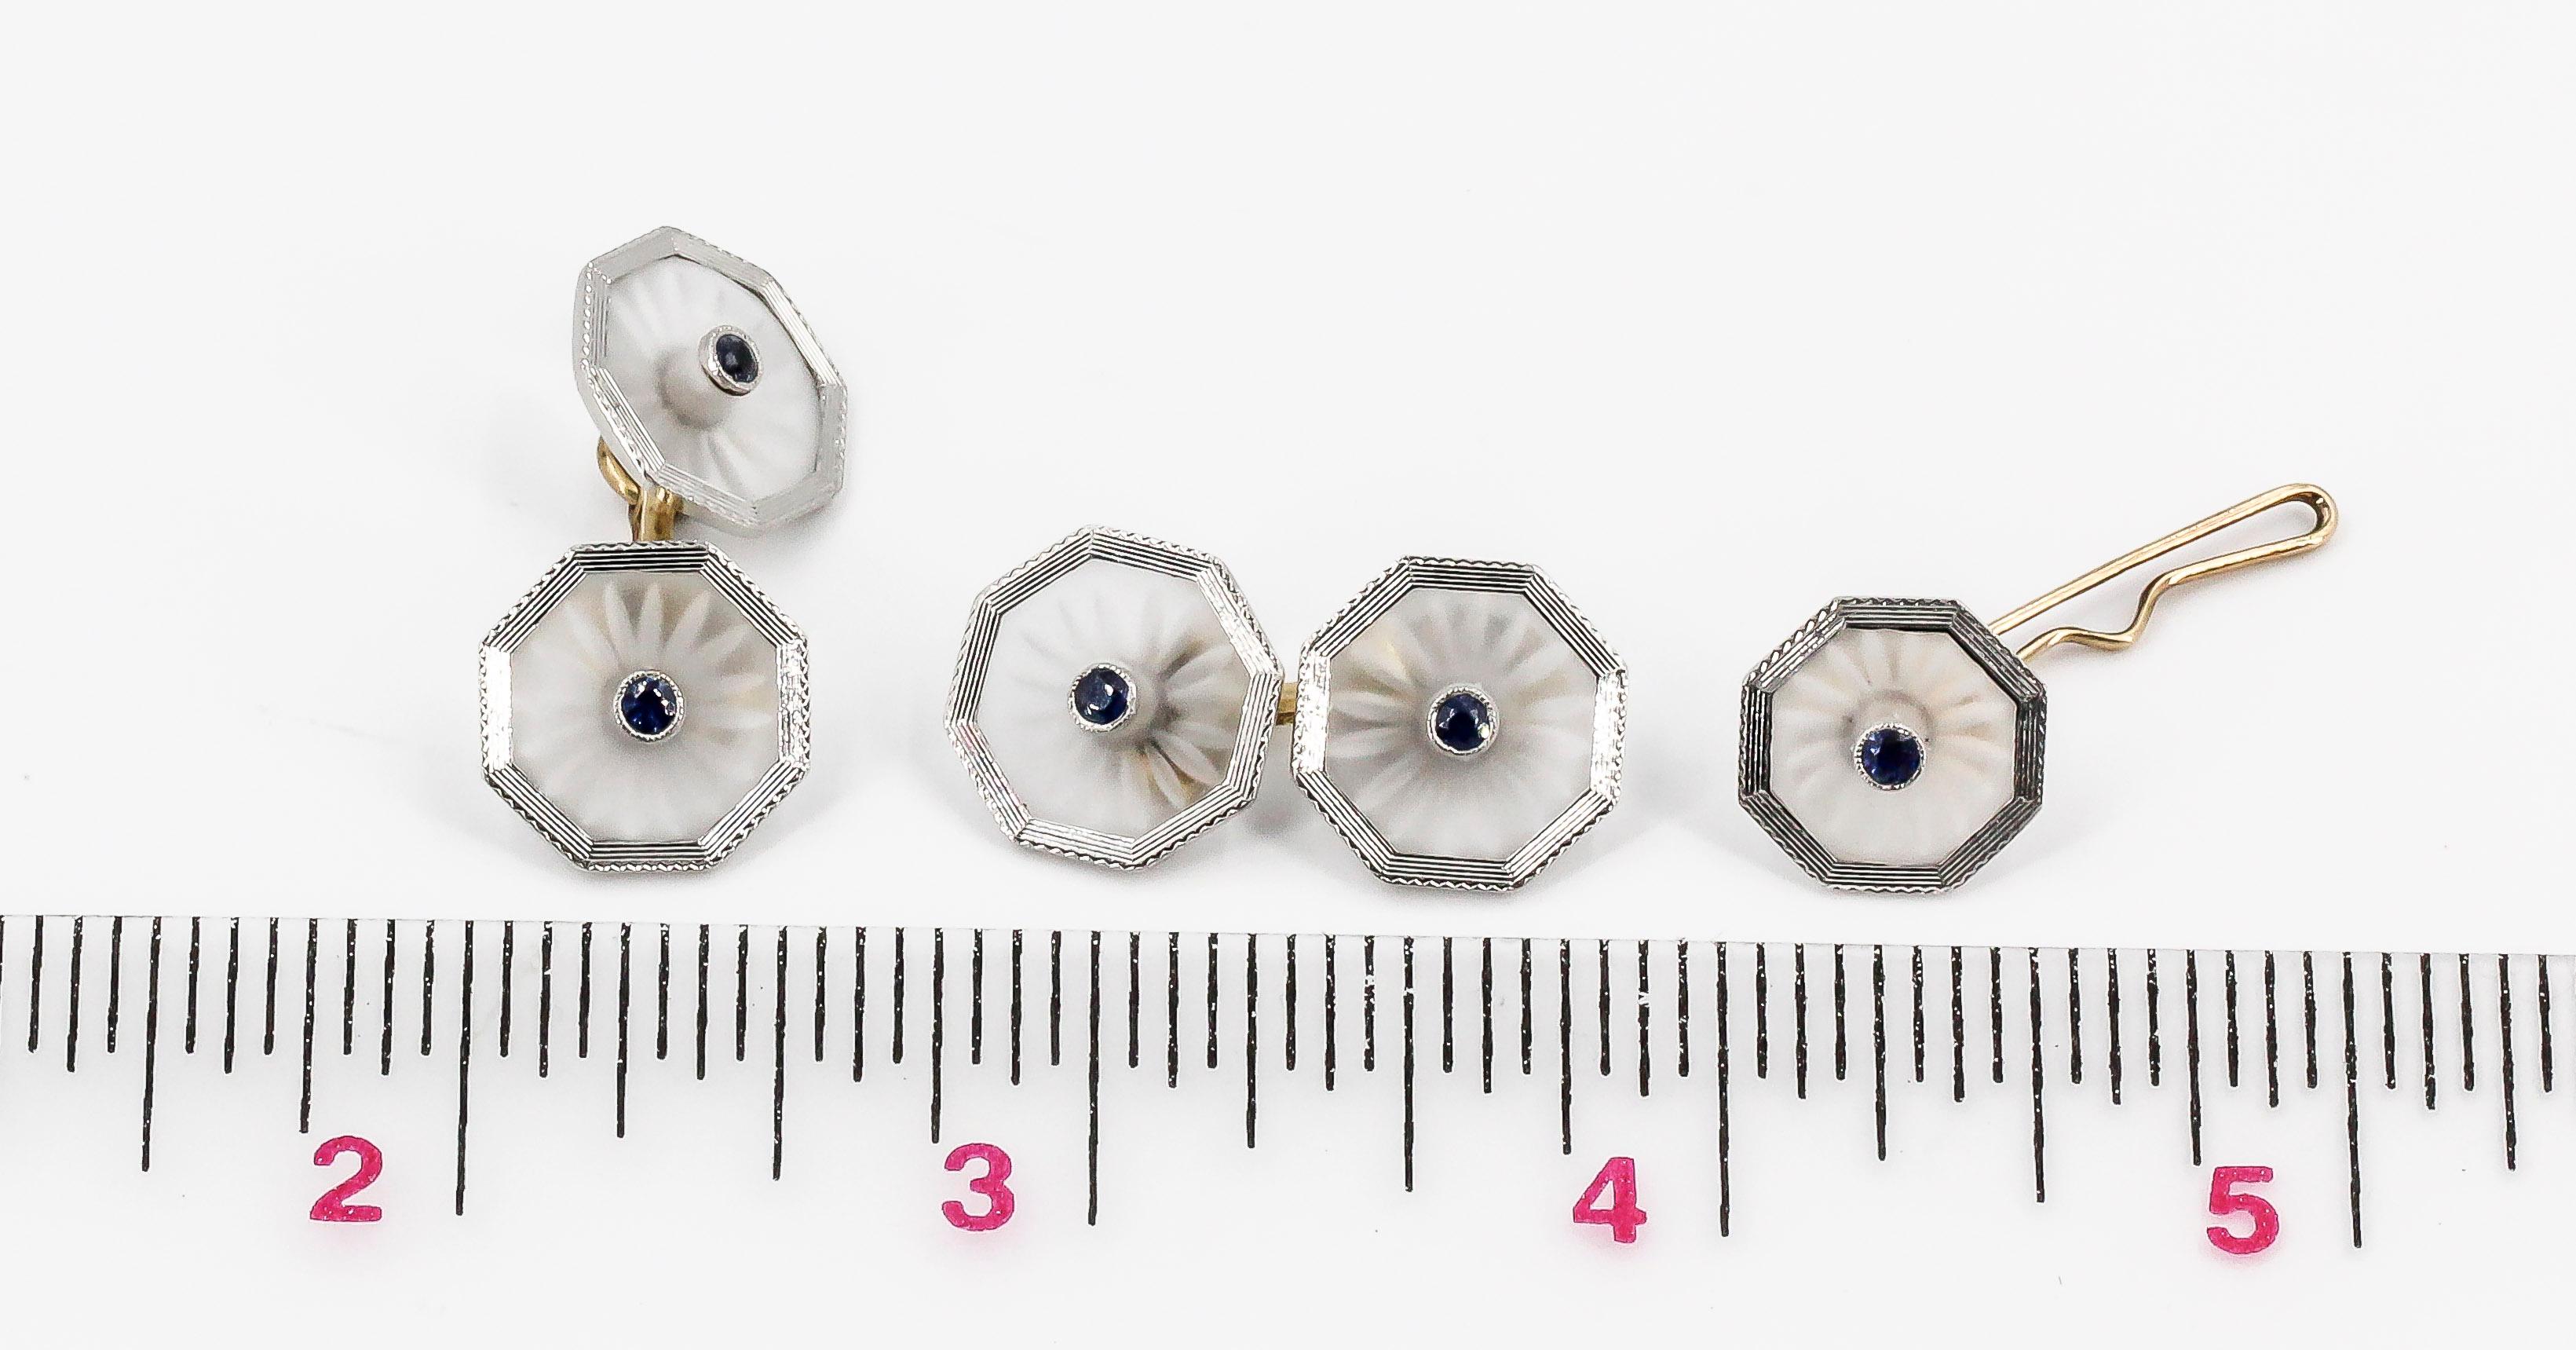 Handsome frosted rock crystal, sapphire, platinum and 14K yellow gold cufflinks, studs and collar buttons set, circa 1920s. The set features 4 studs and three collar buttons, along with two cufflinks.
